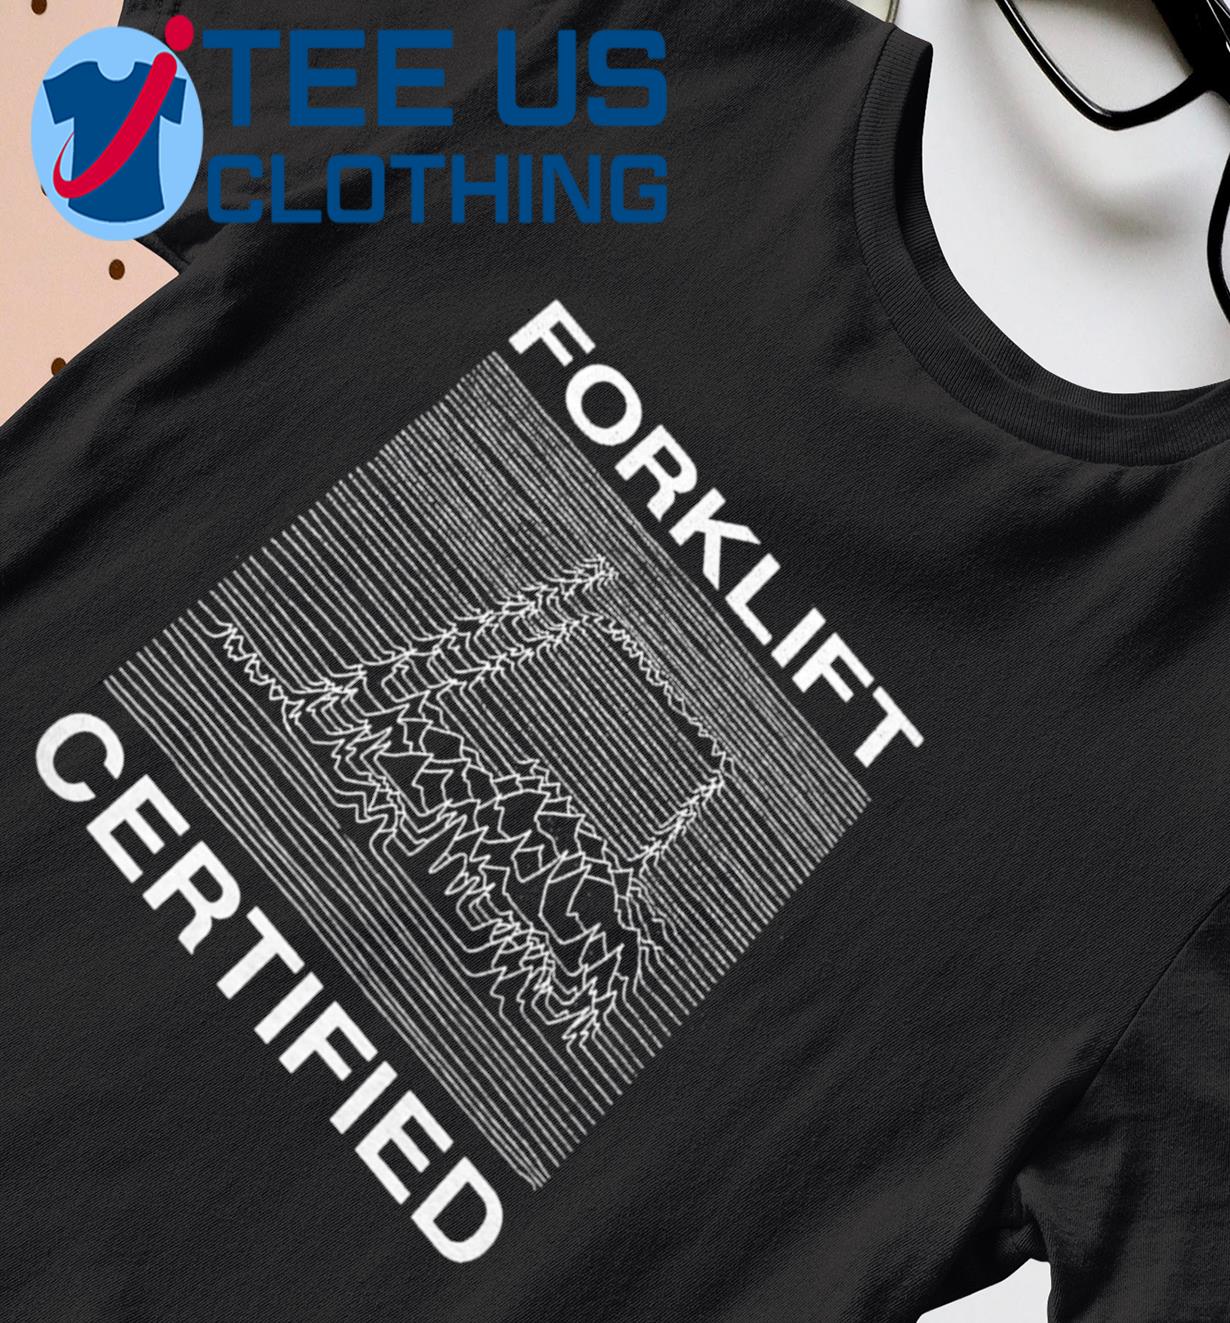 Forklift Certified Division New Shirt